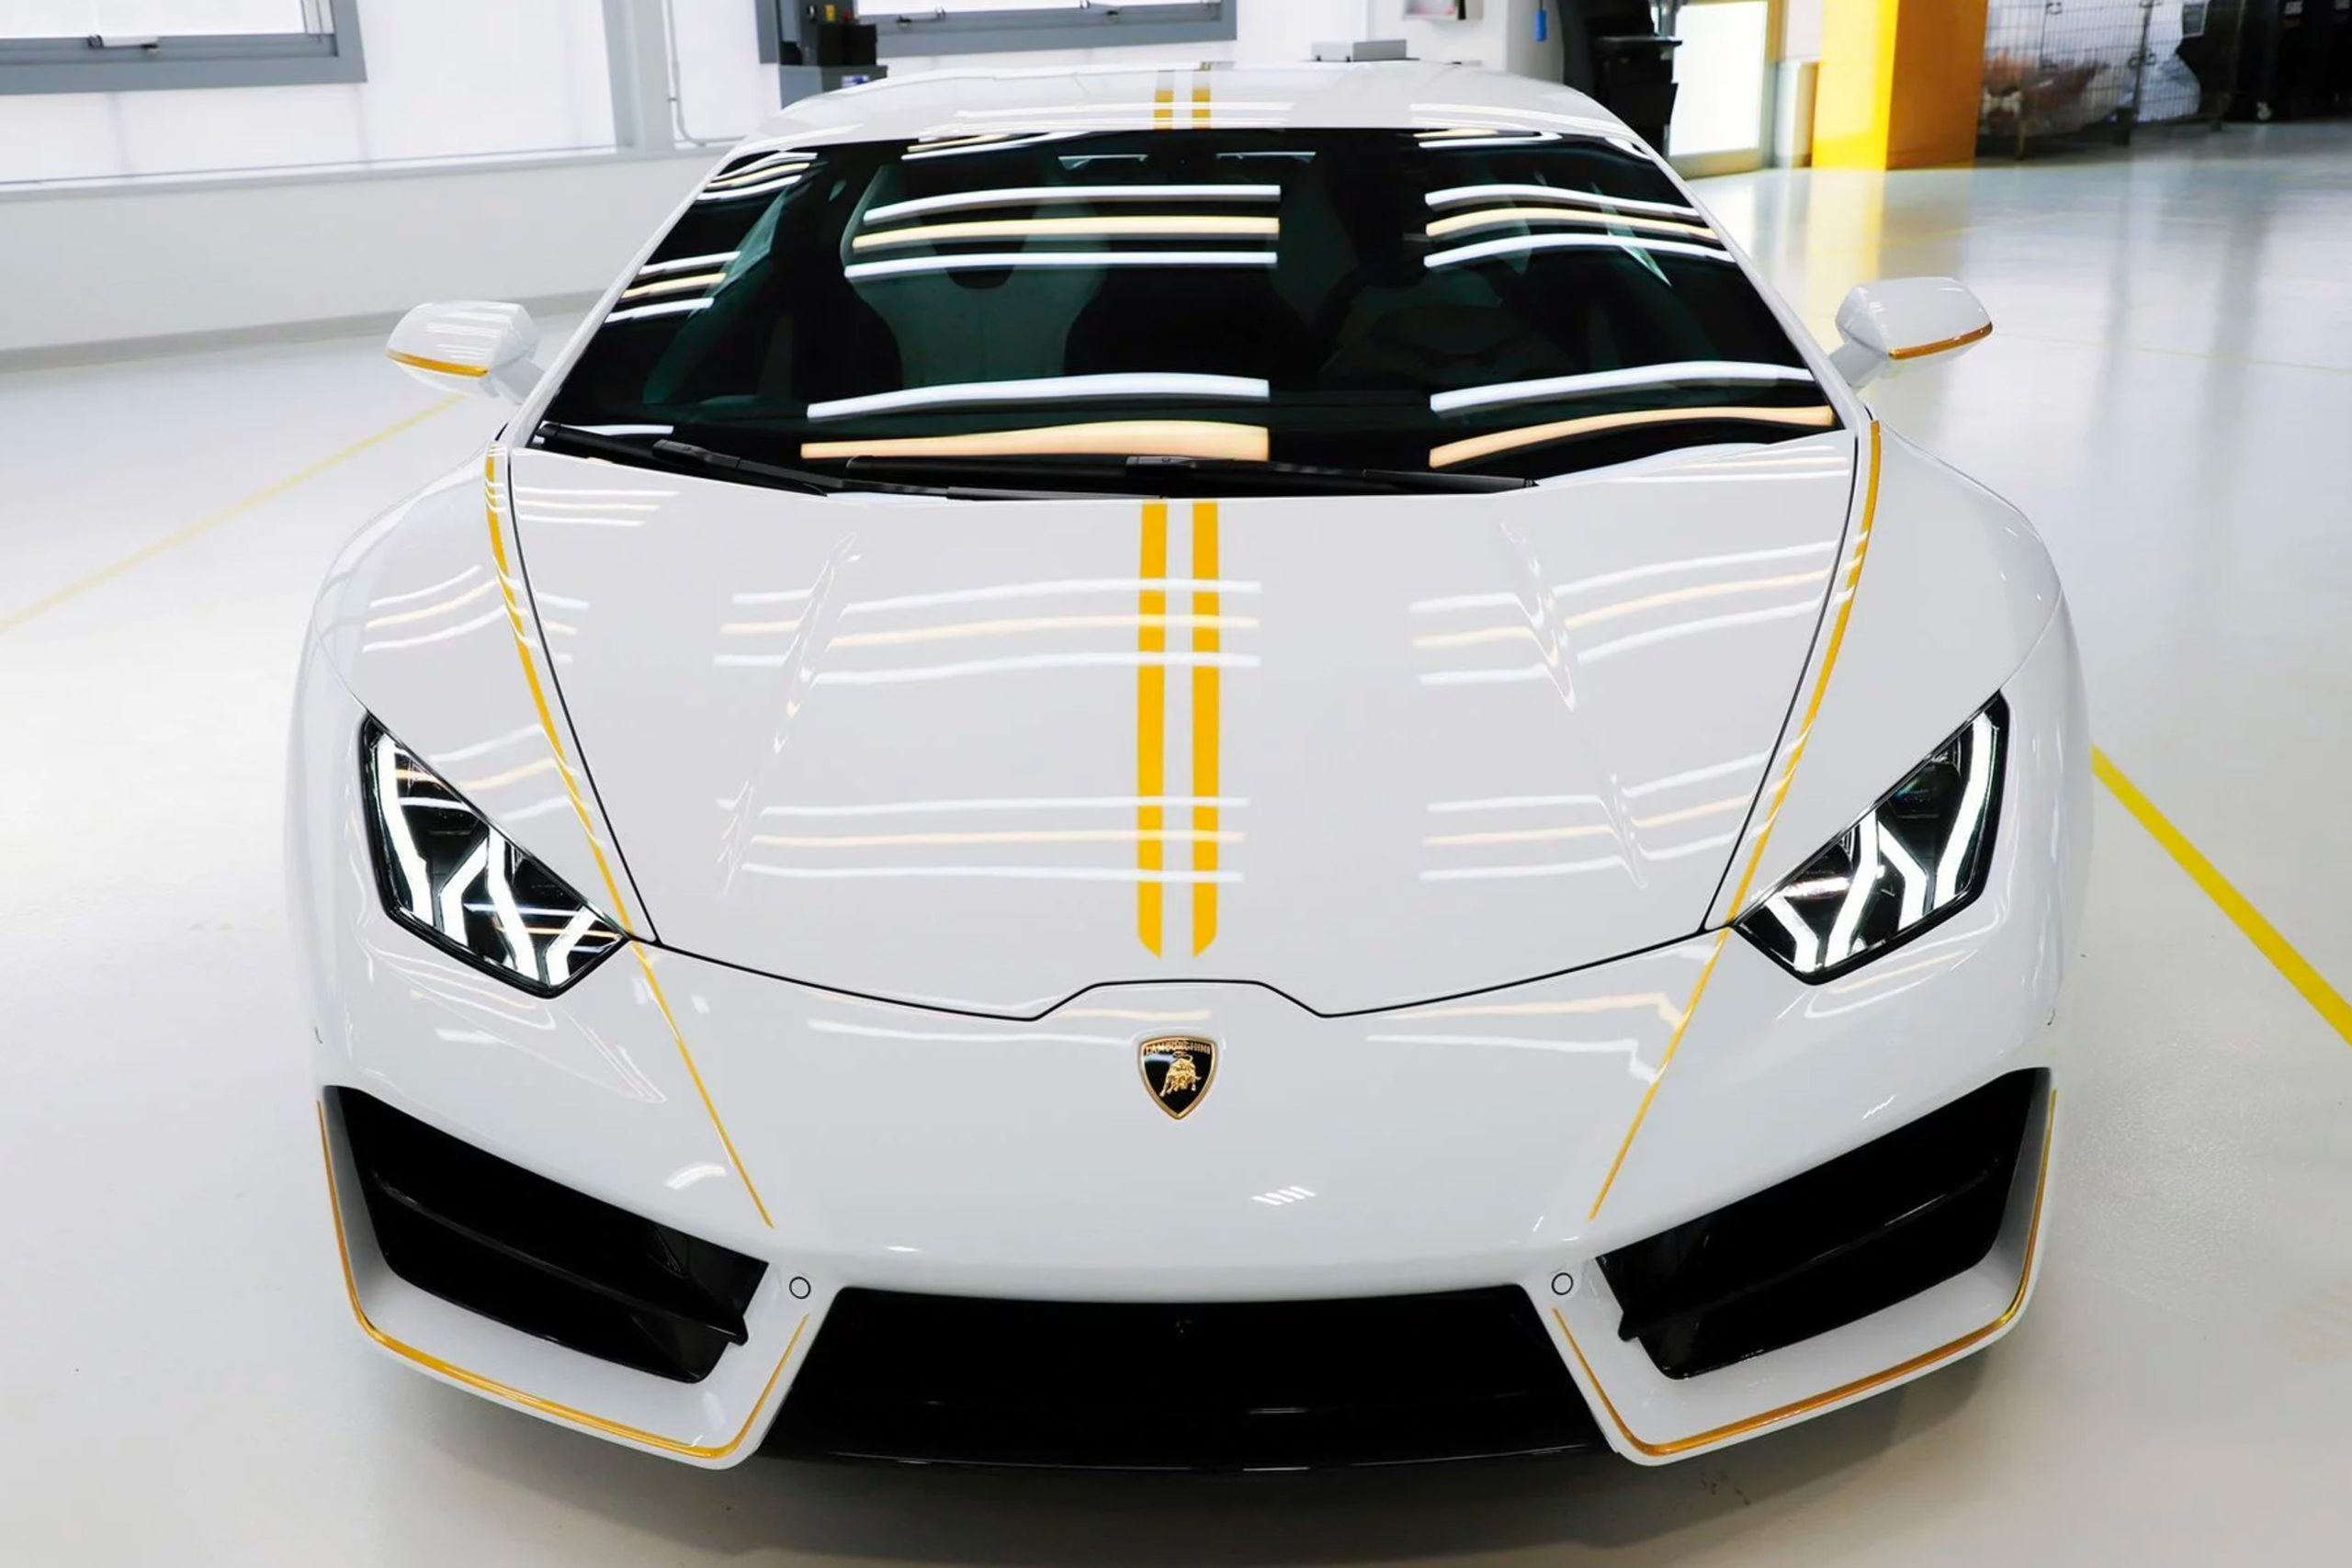 The Pope’s Lamborghini Huracan Sold For Almost $1.3 Million 